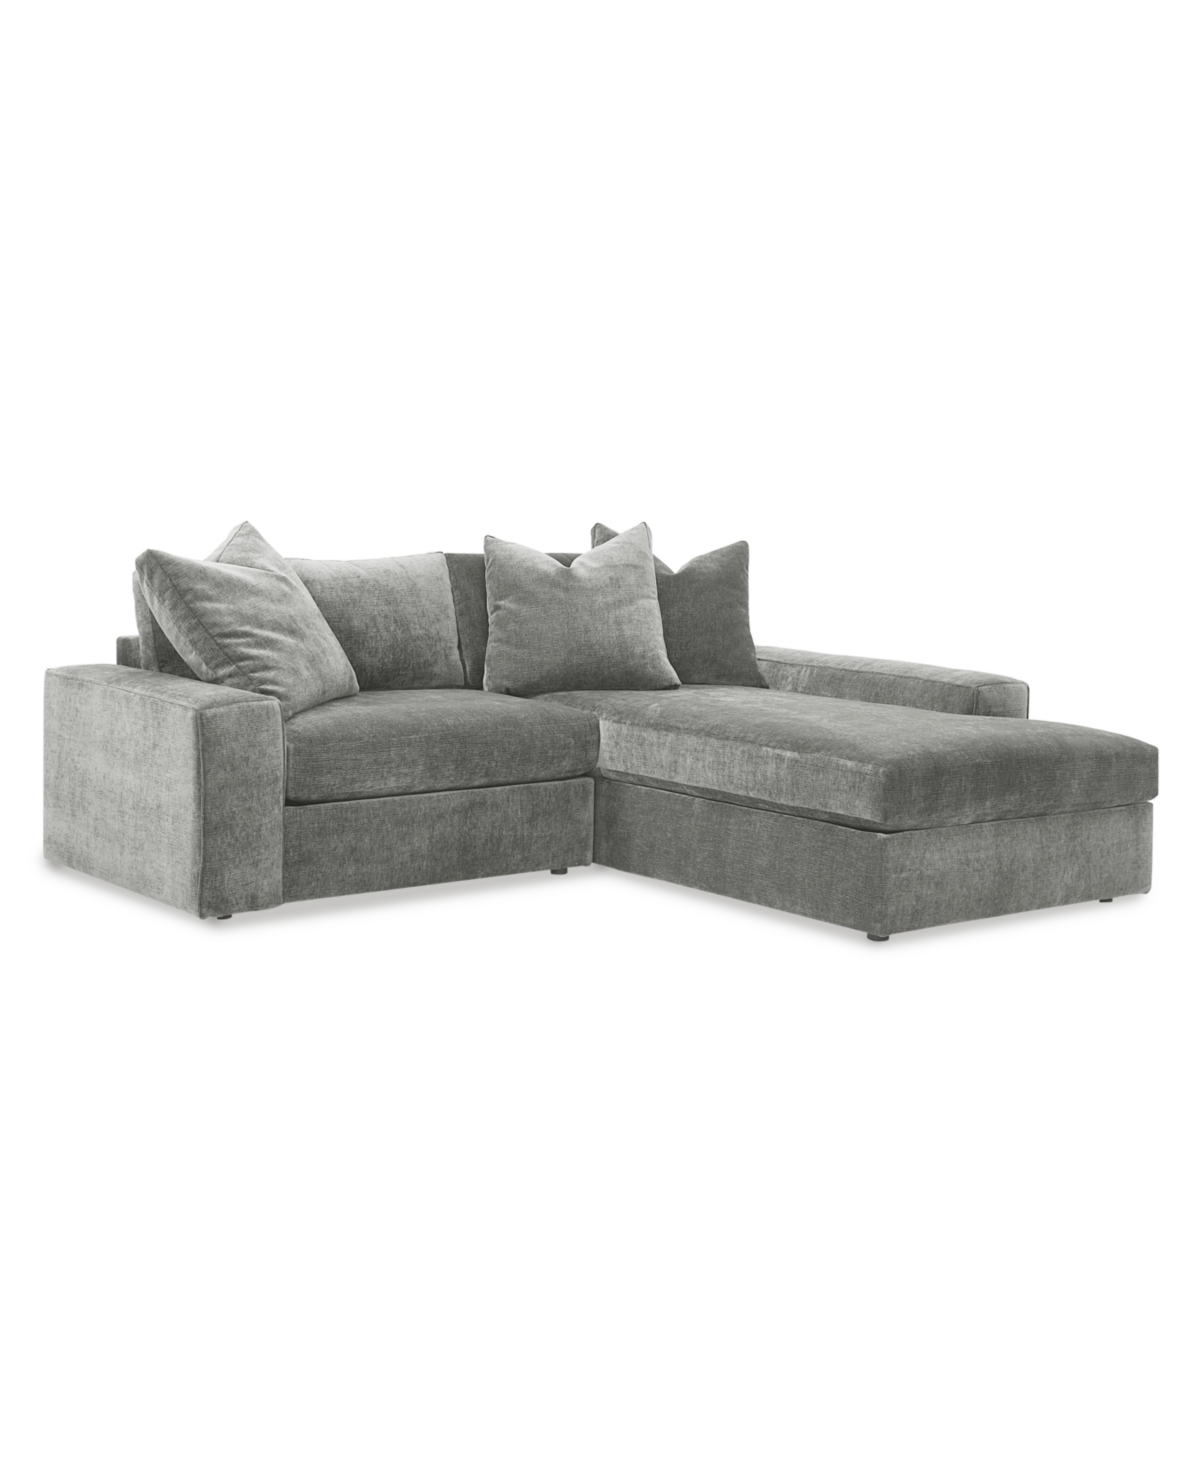 Furniture Michola 98" 2-pc. Fabric Sectional With Chaise, Created For Macy's In Zion Forest